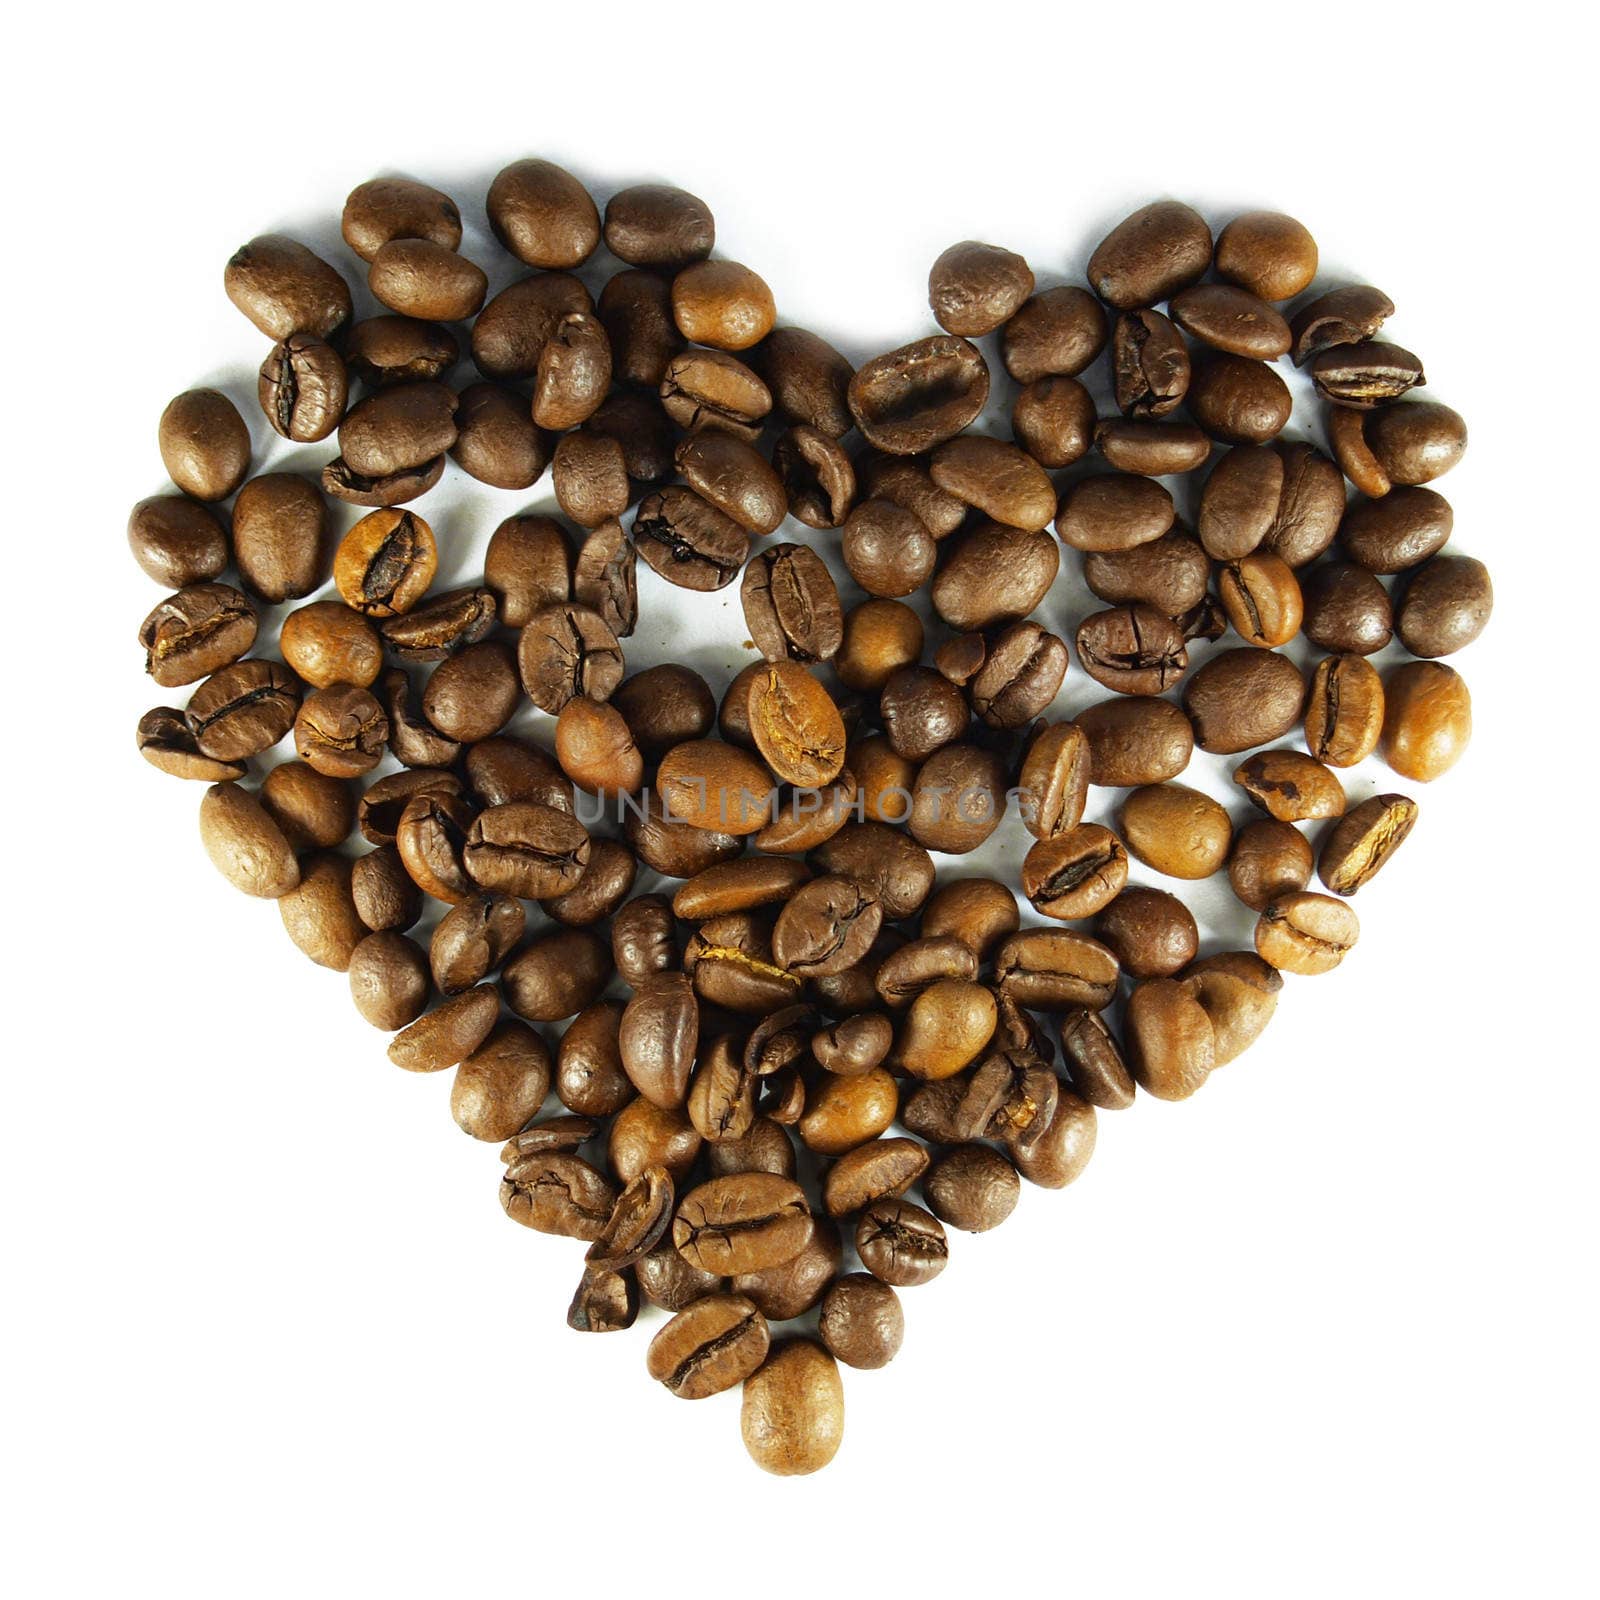 Coffee grains laid out in the form of heart on the isolated white background